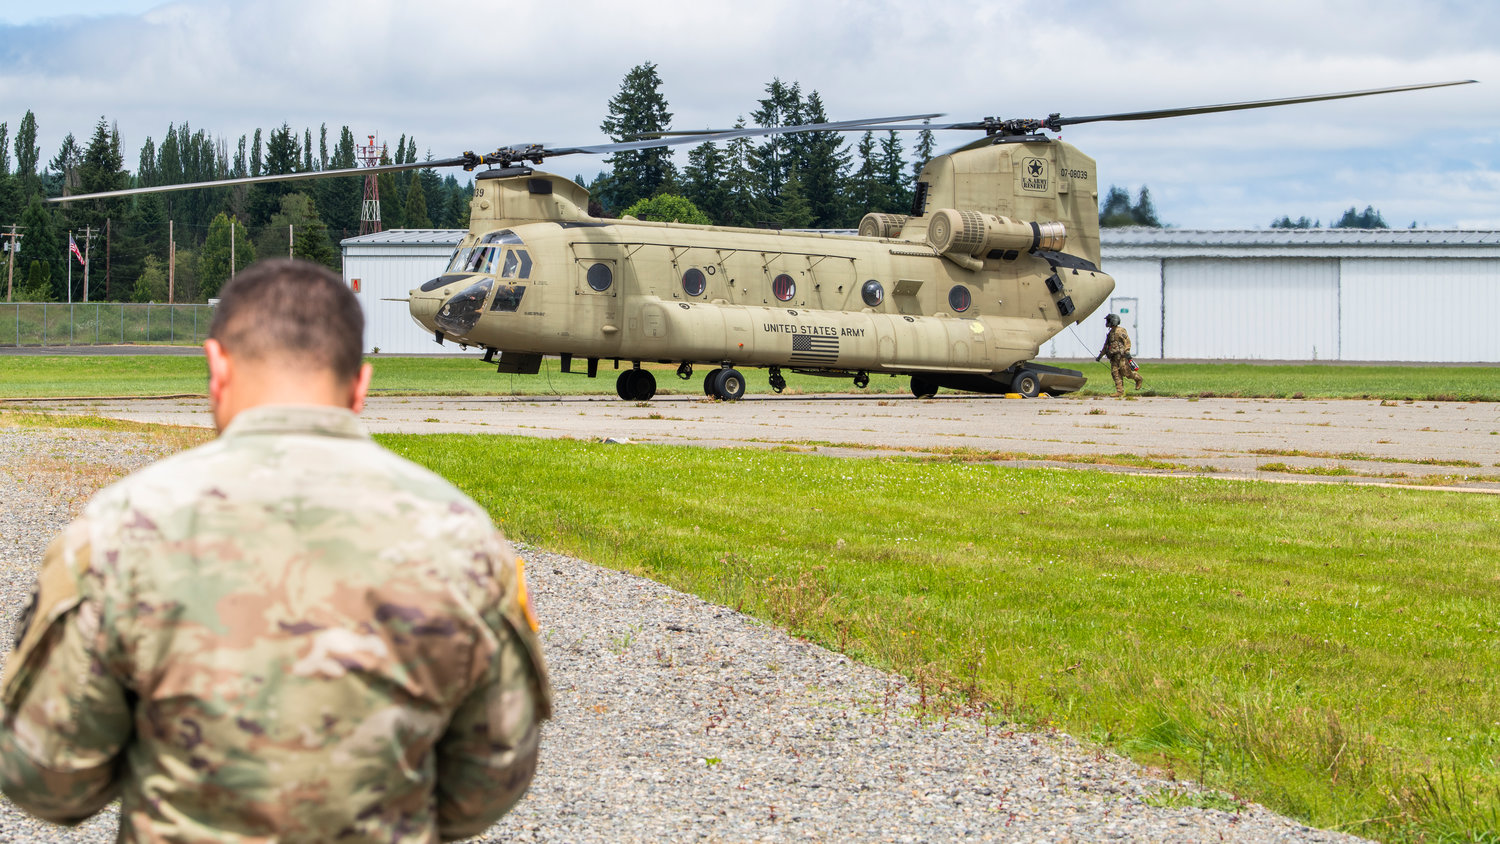 Crews from Joint Base Lewis-McChord exit a Chinook helicopter after a landing at the Chehalis-Centralia Airport as they prepare to fuel up during a military training exercise on Wednesday.